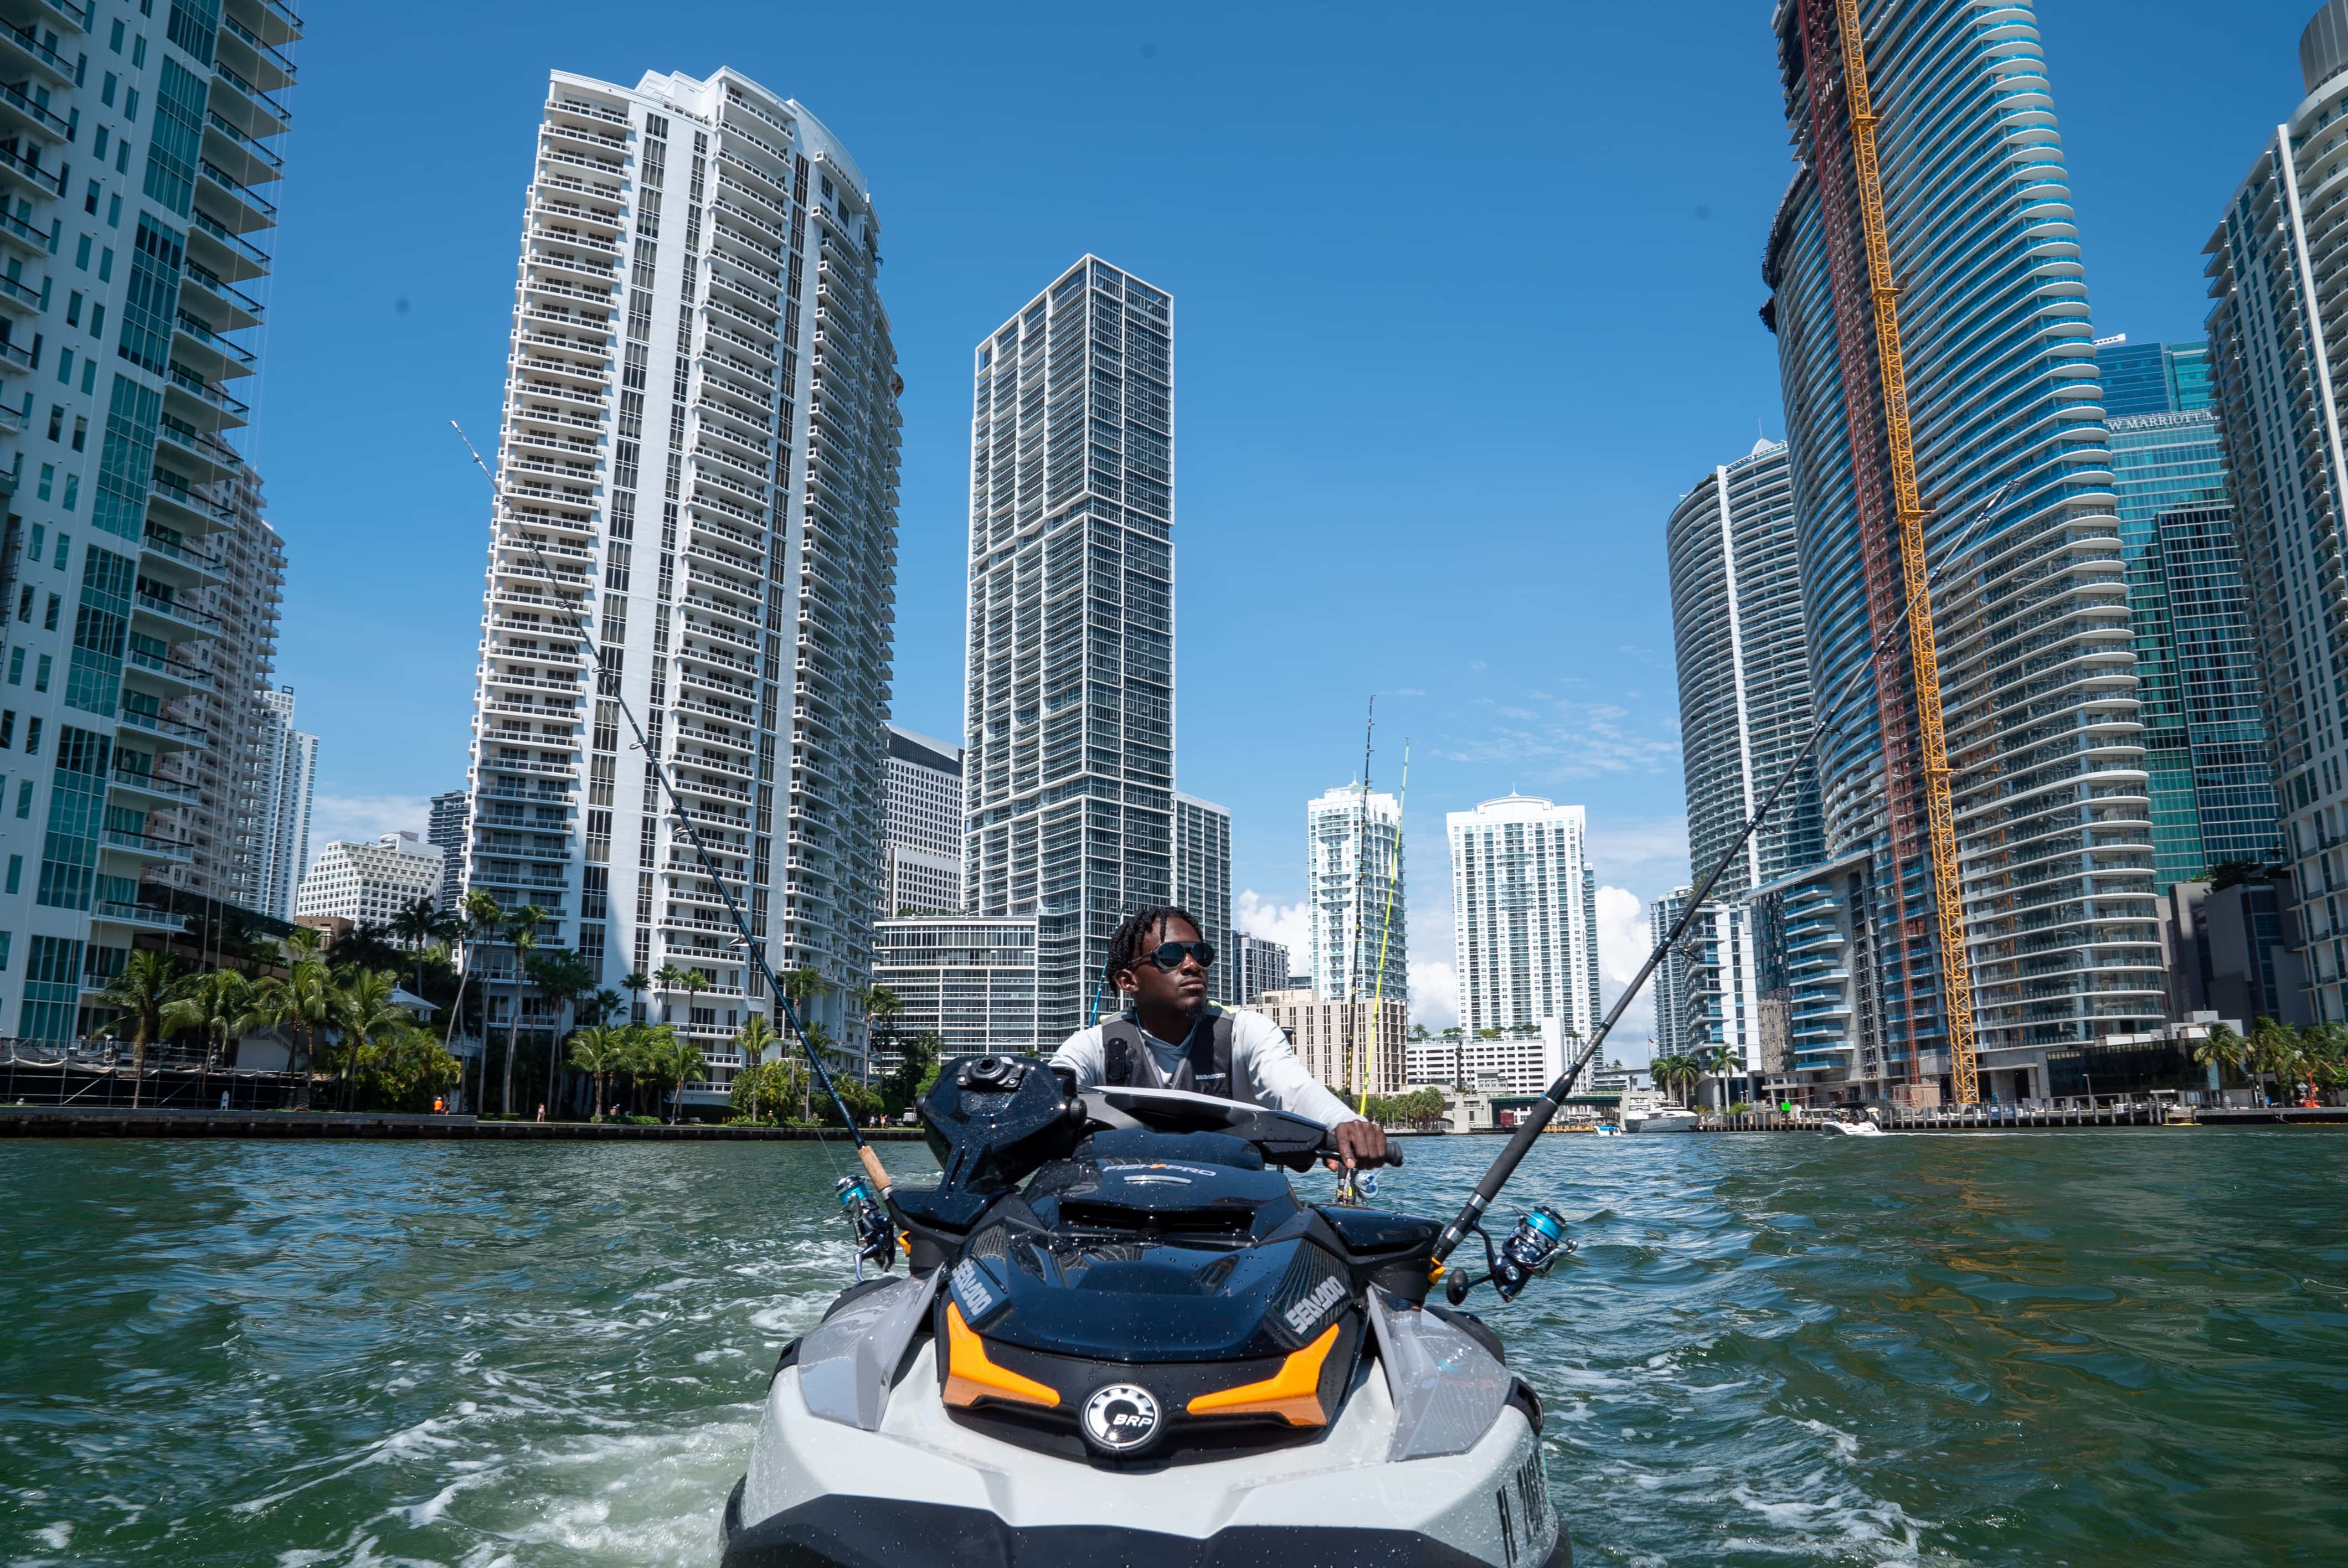 Emmanuel Williams on a Sea-Doo FISHPRO with city in background